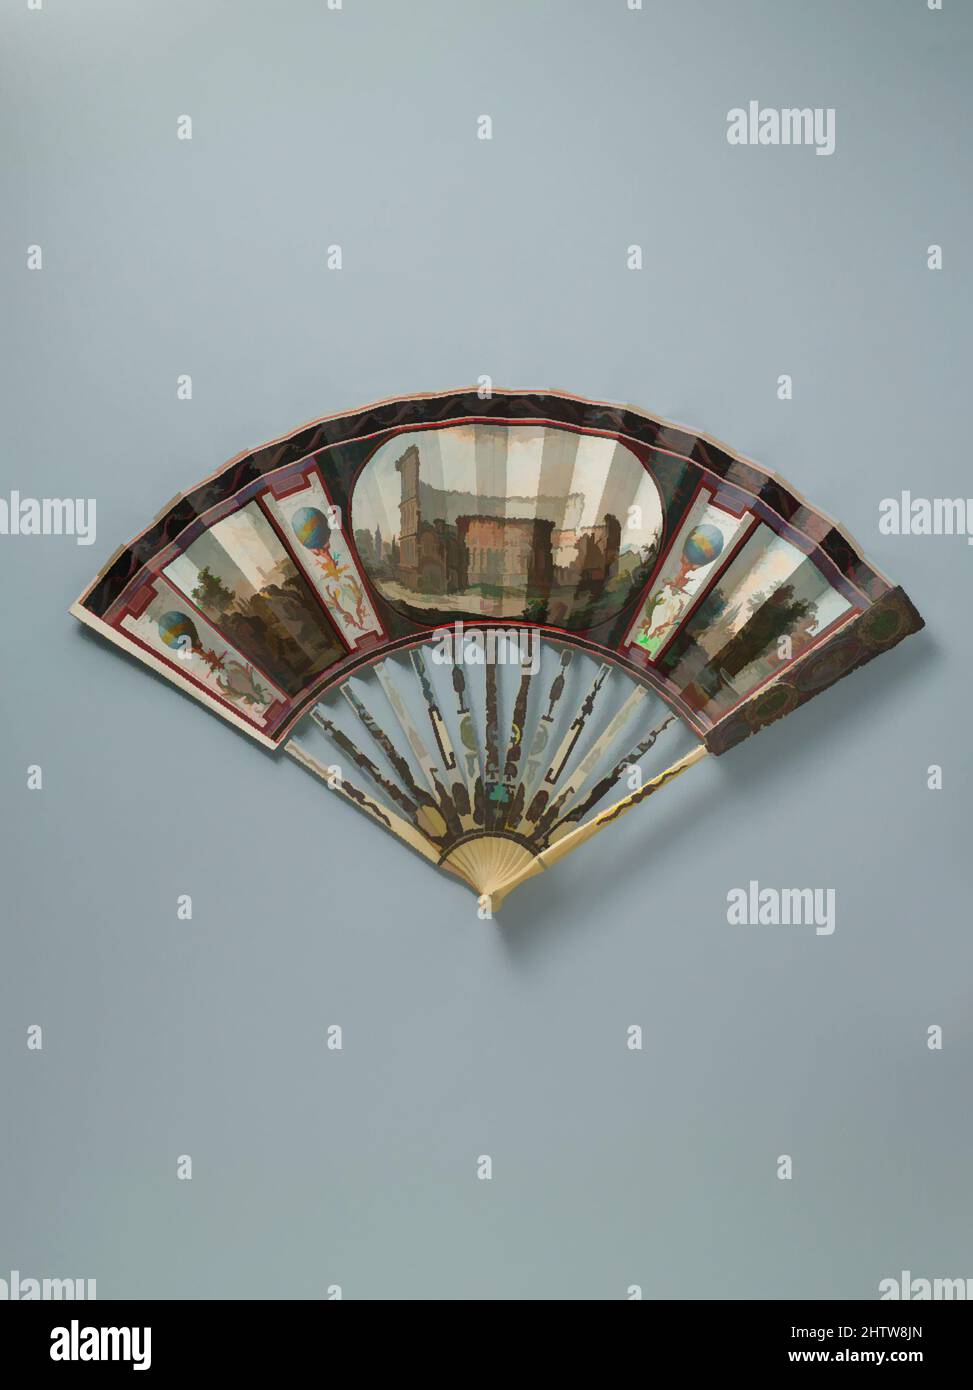 Art inspired by Fan, late 18th century, Italian, Parchment, paint, ivory, silver, colored foil, glass, metal, 20 3/4 x 11 1/4 in. (52.7 x 28.6 cm), Fans, Classic works modernized by Artotop with a splash of modernity. Shapes, color and value, eye-catching visual impact on art. Emotions through freedom of artworks in a contemporary way. A timeless message pursuing a wildly creative new direction. Artists turning to the digital medium and creating the Artotop NFT Stock Photo